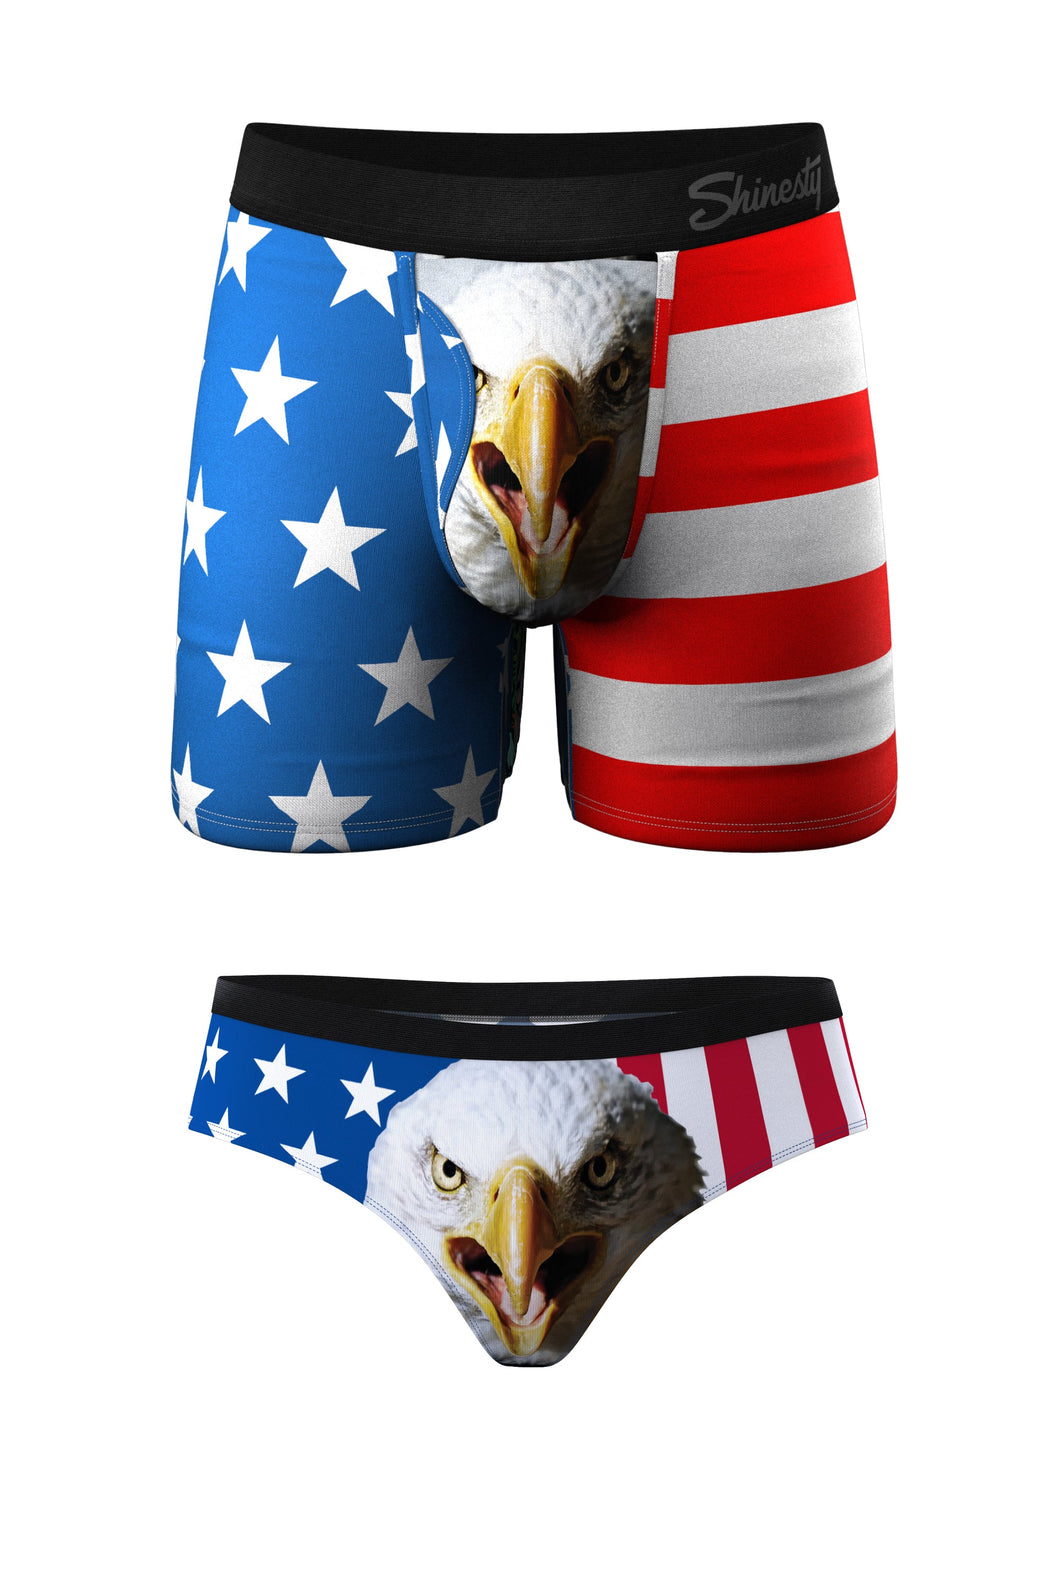 The stars and stripes boxer and cheeky pack